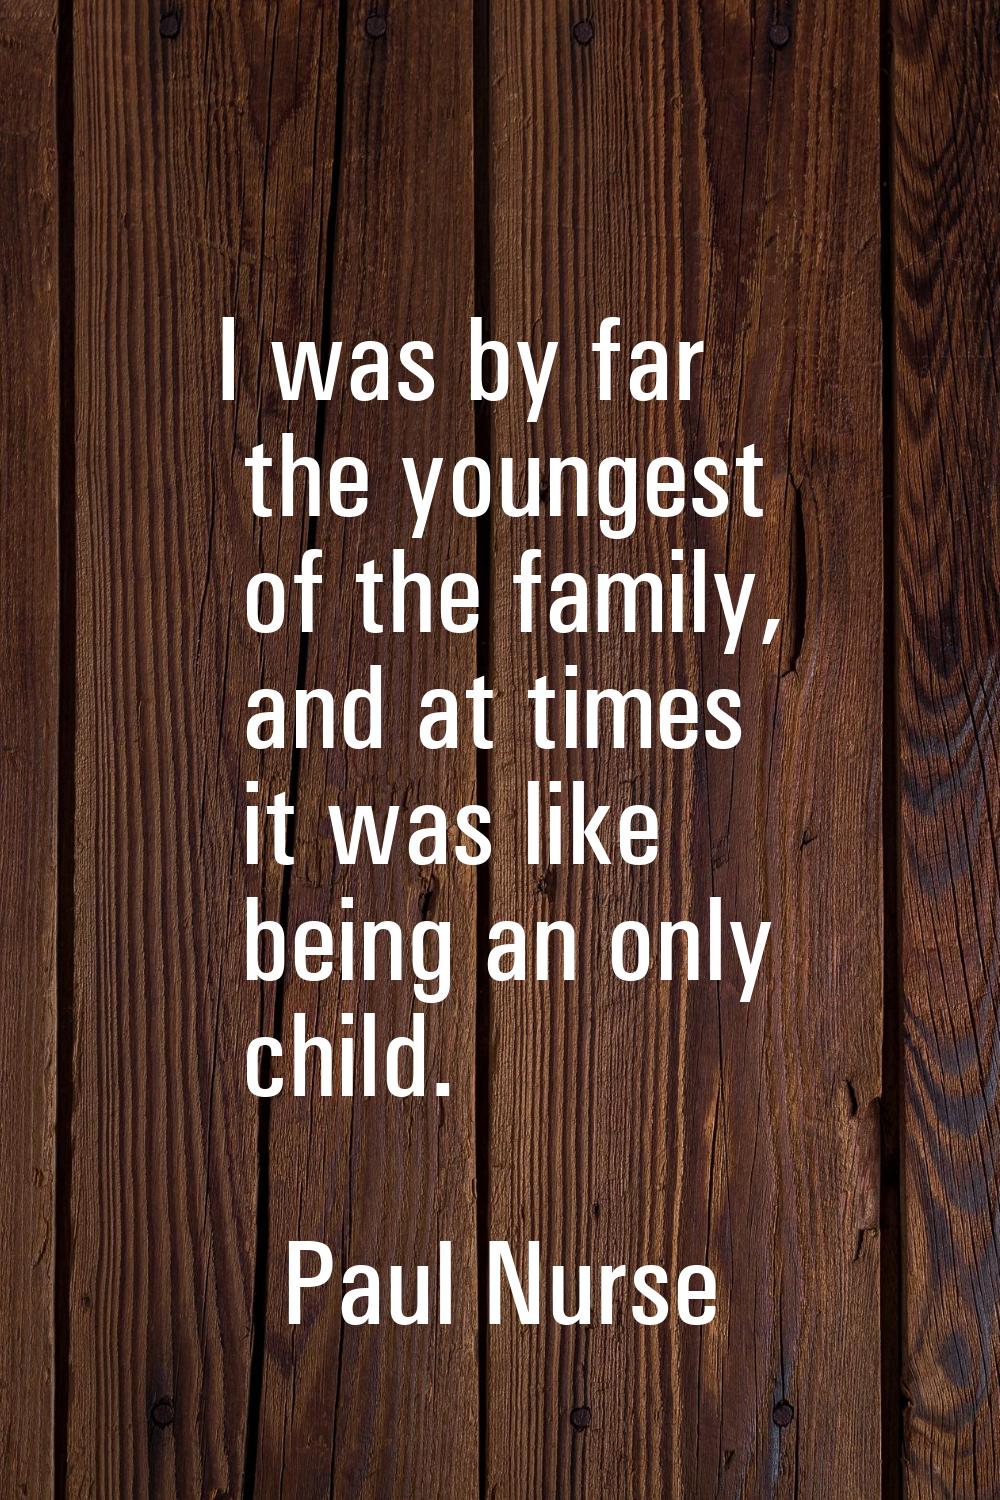 I was by far the youngest of the family, and at times it was like being an only child.